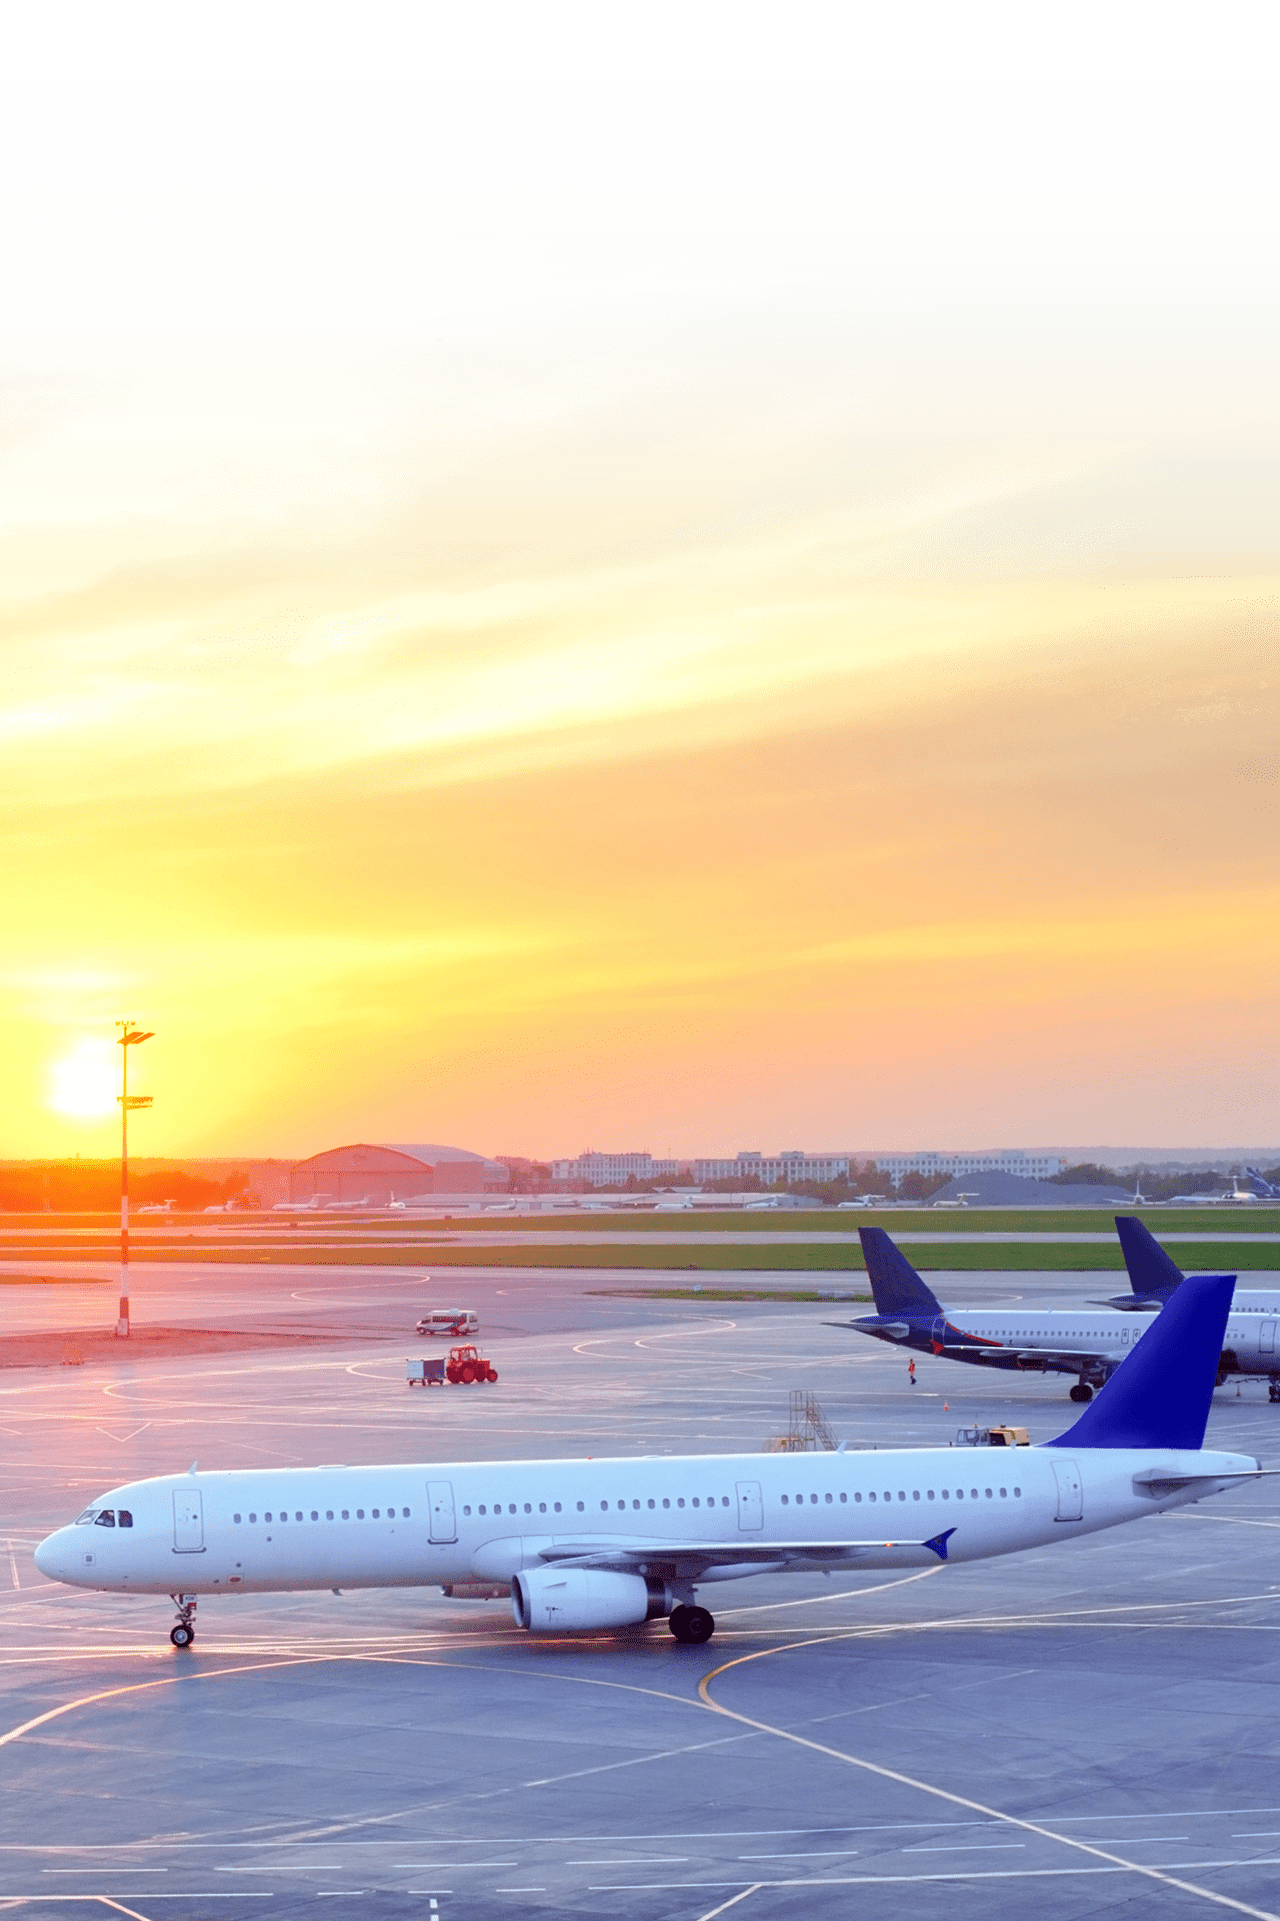 View of Airplanes at airport in the beautiful sunset